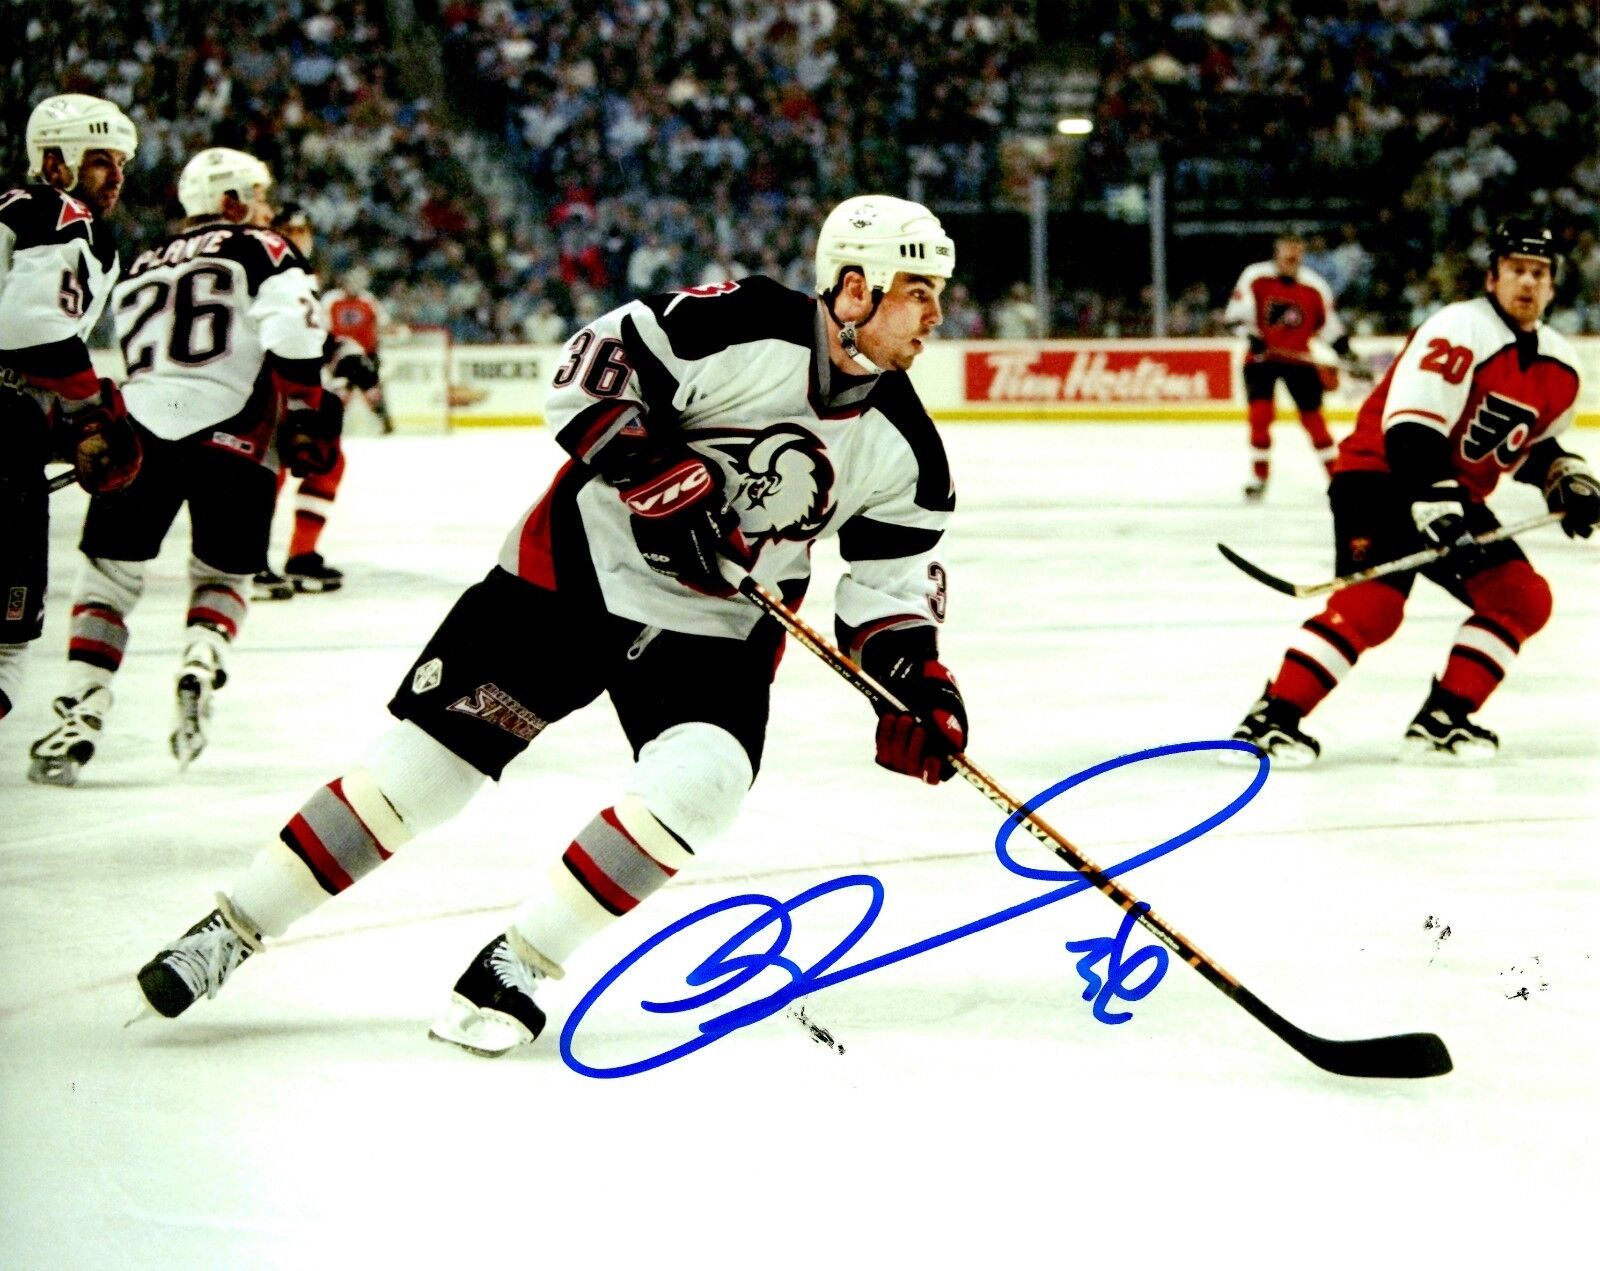 Signed 8x10 MATTHEW BARNABY Buffalo Sabres Autographed Photo Poster painting - COA